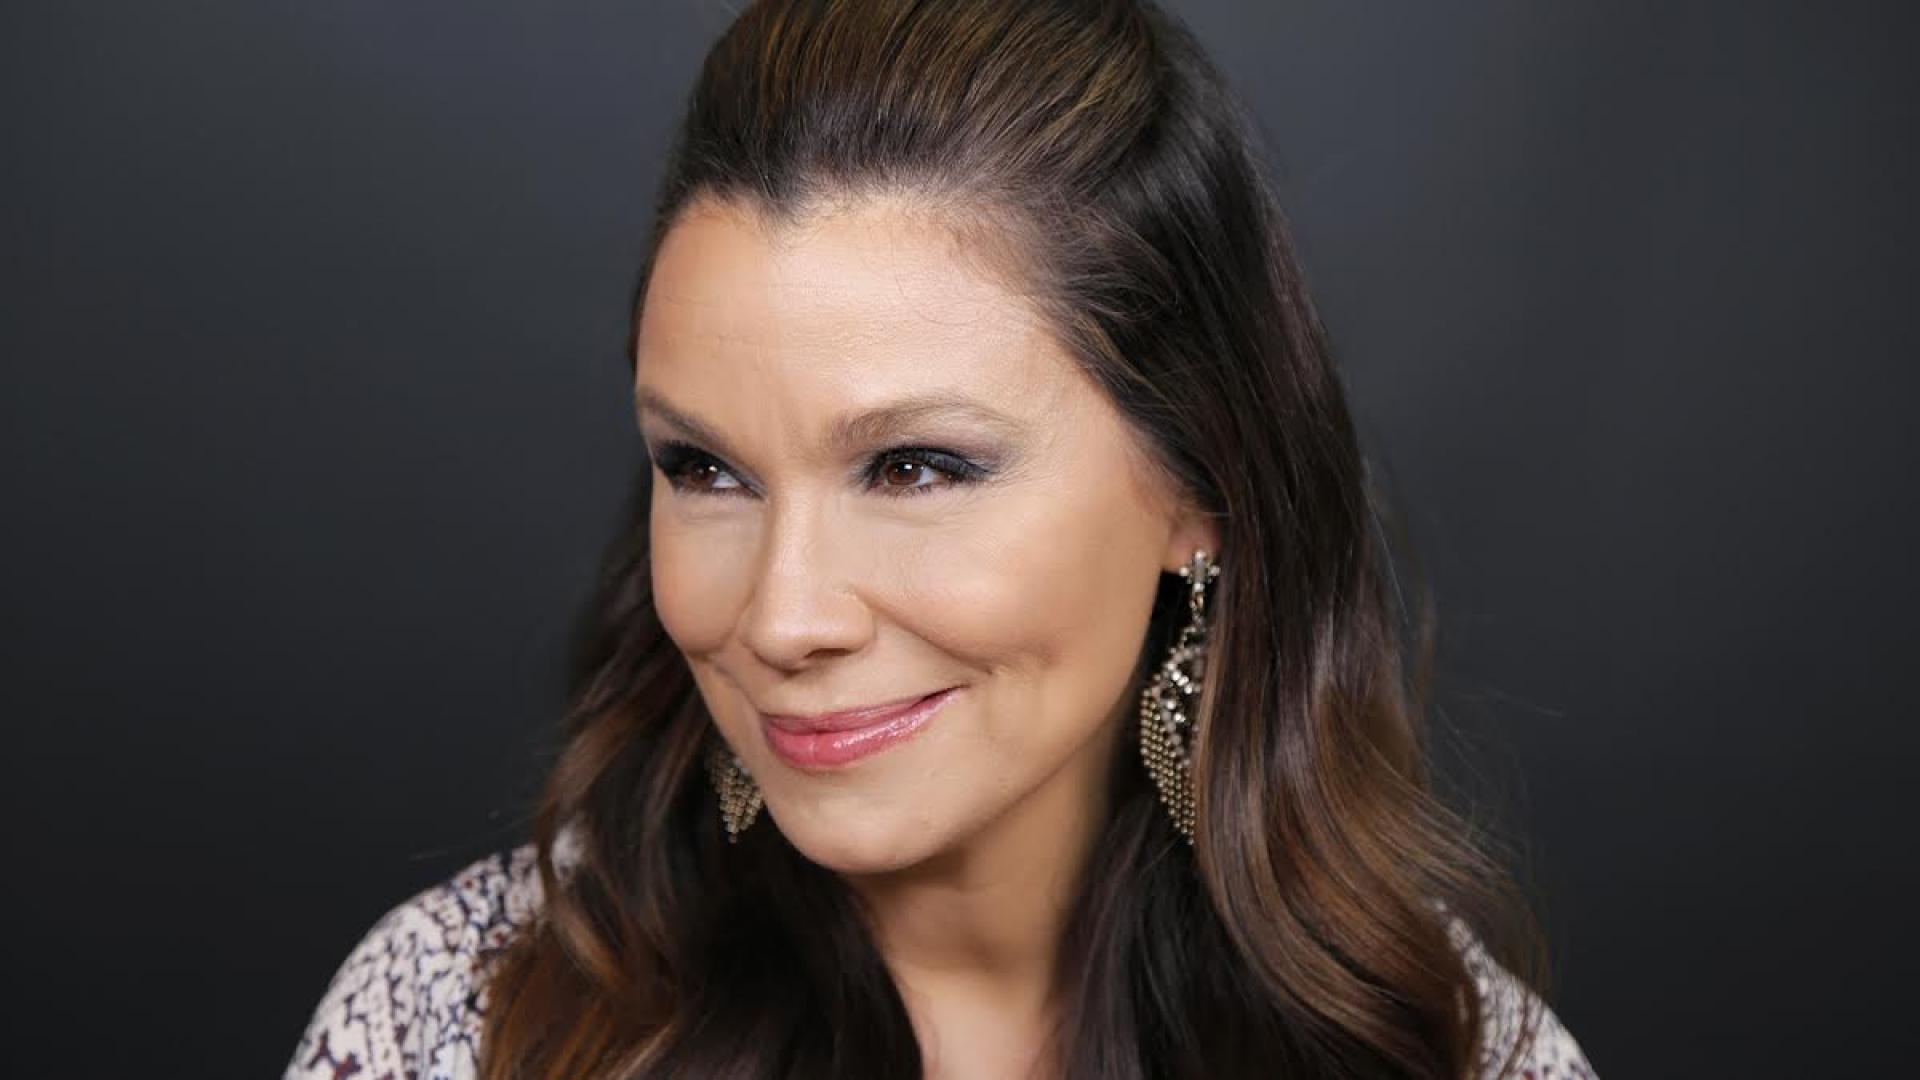 Makeup Video Tutorial How To Contour In 3 Easy Steps Rachael Ray Show